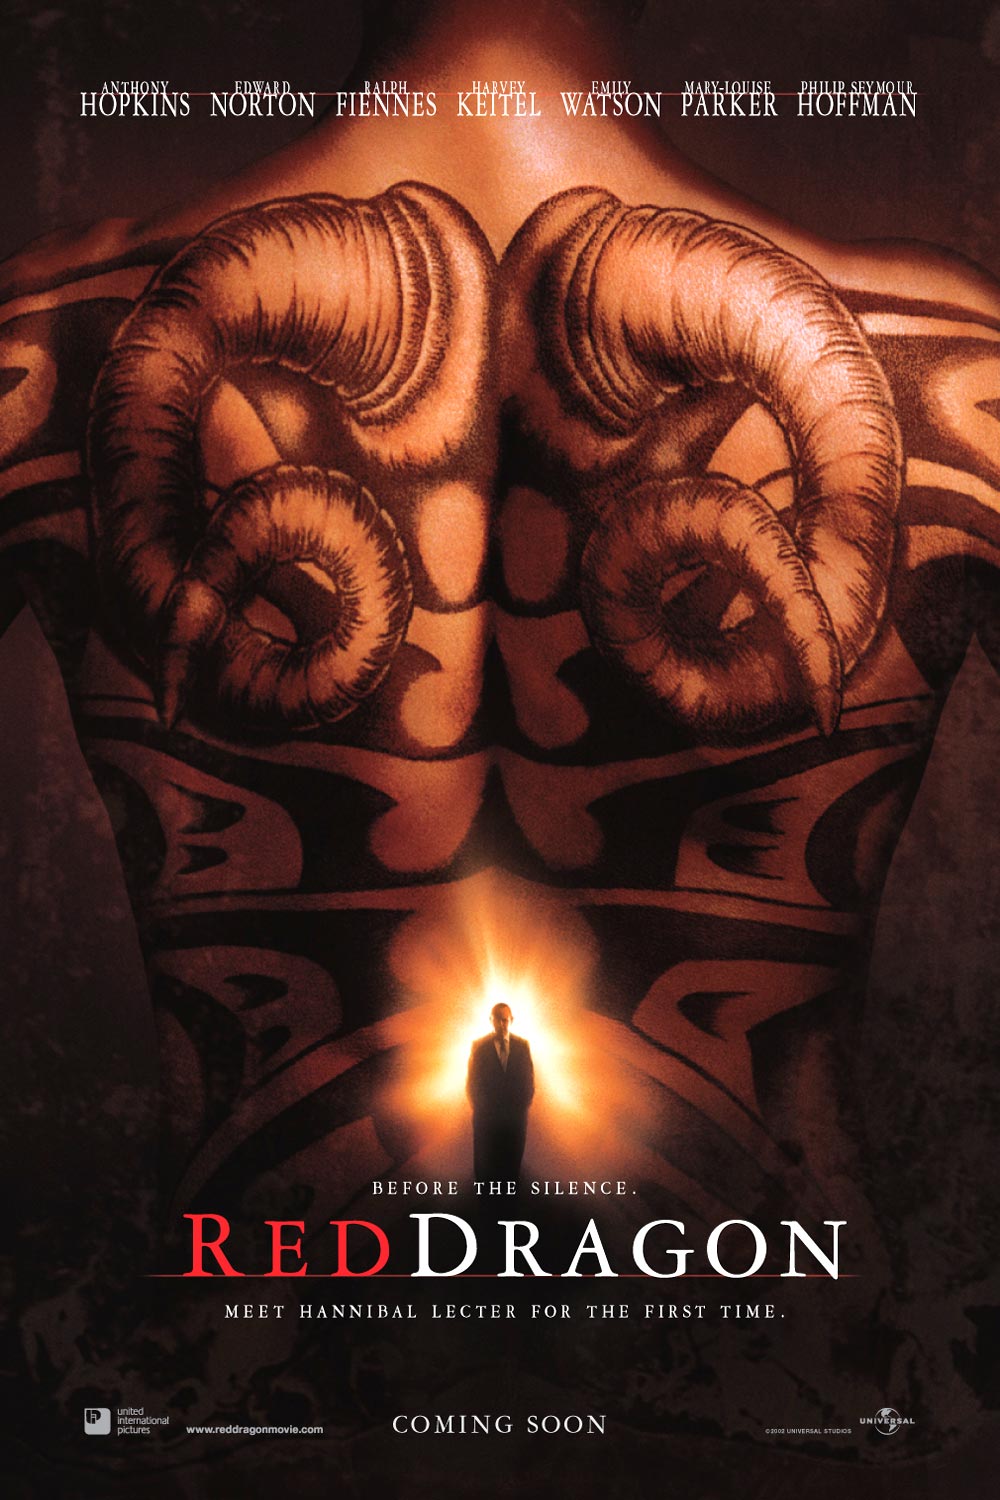   (Red Dragon, 2002)